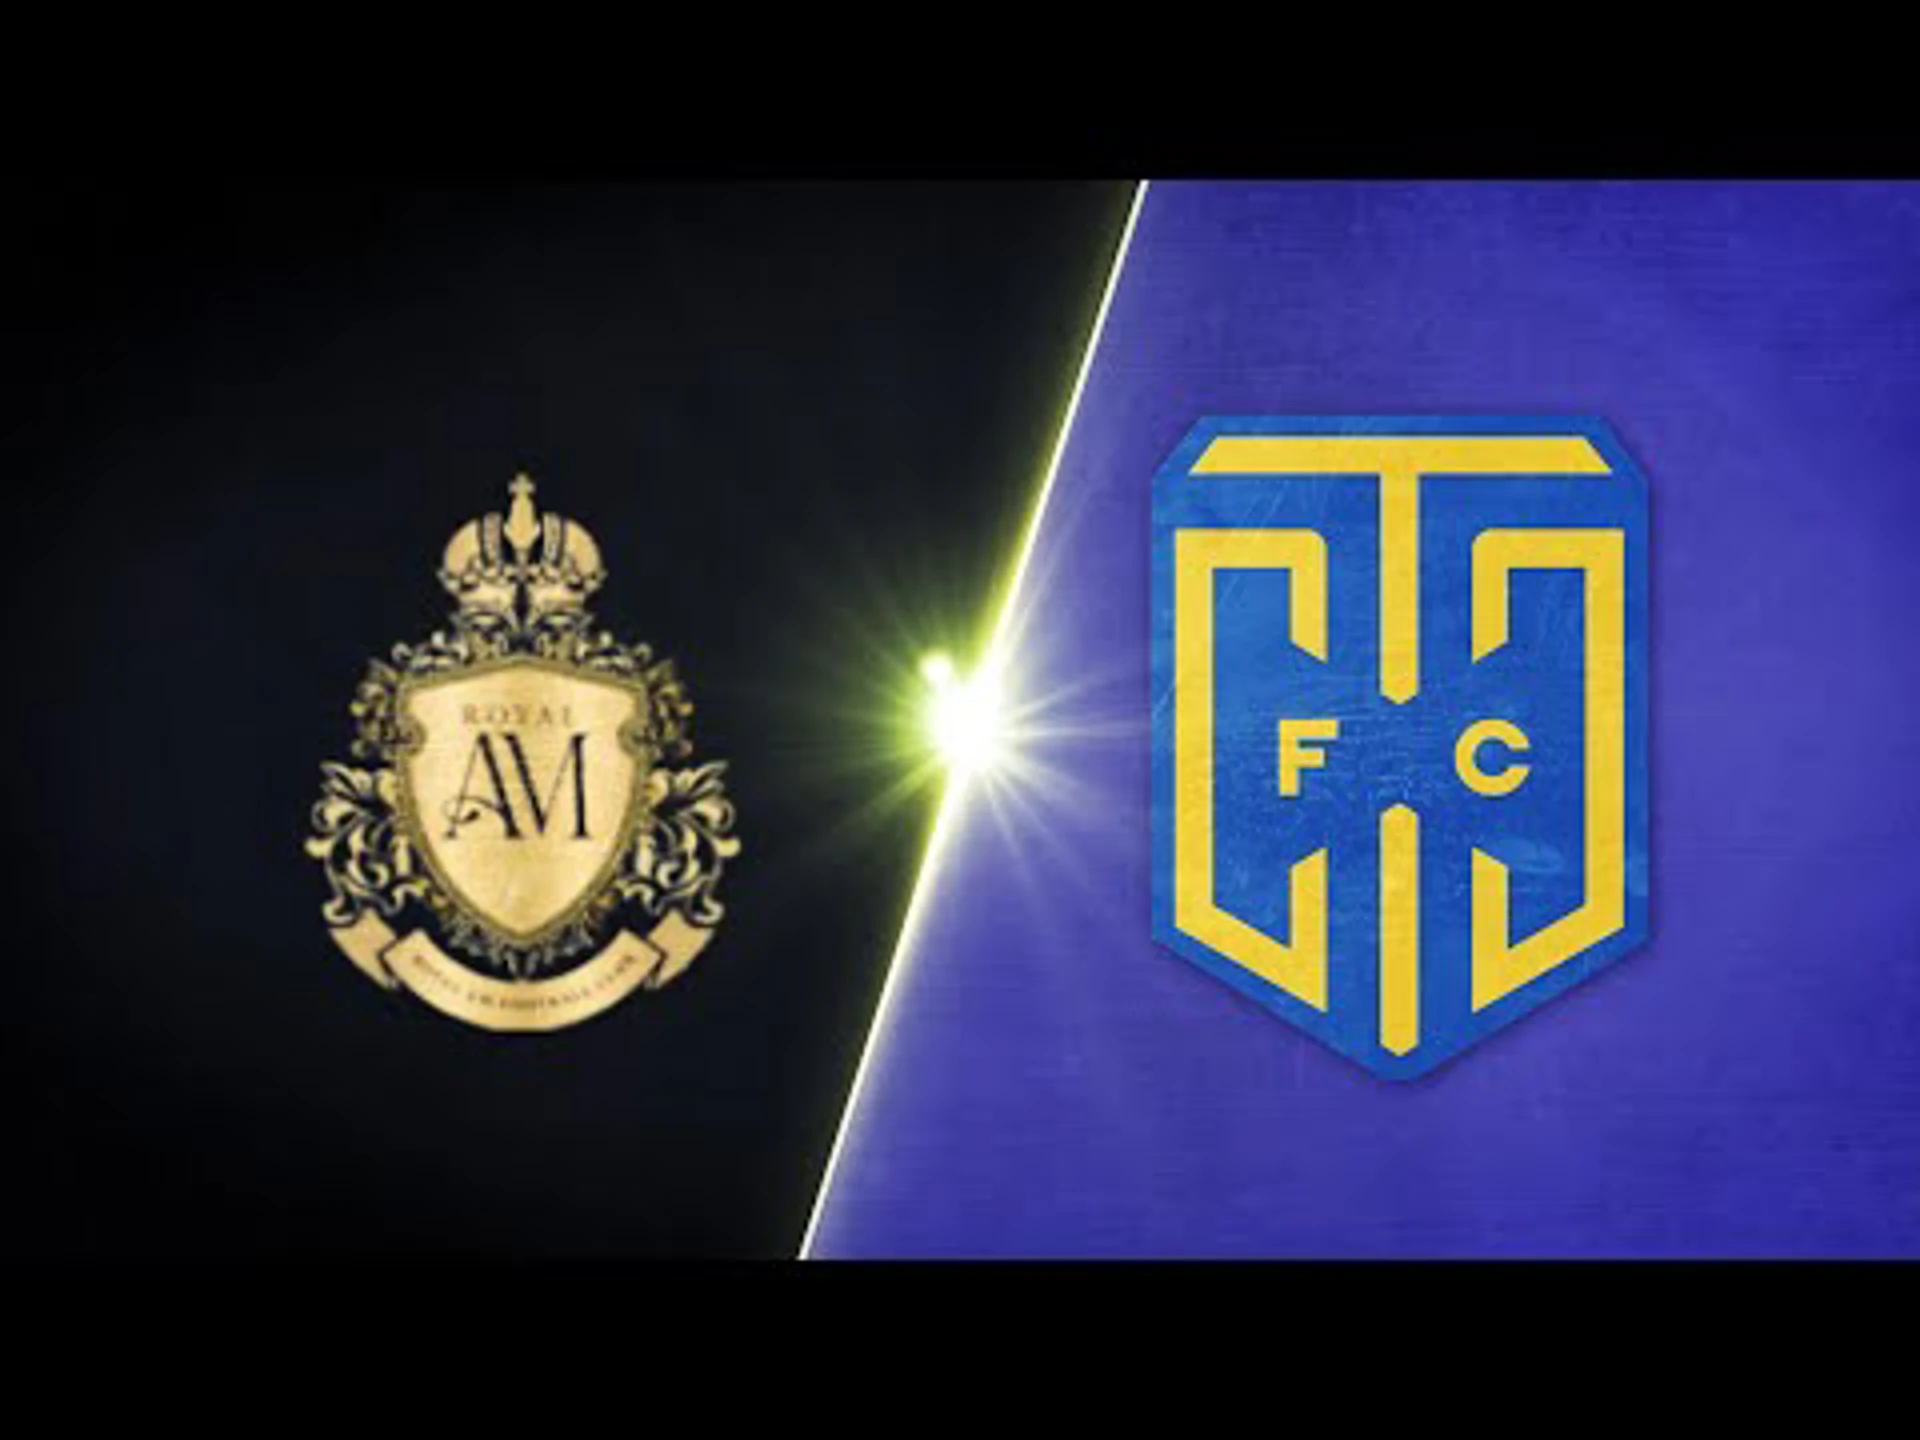 Royal AM v Cape Town City | 90 in 90 | DStv Premiership | Highlights